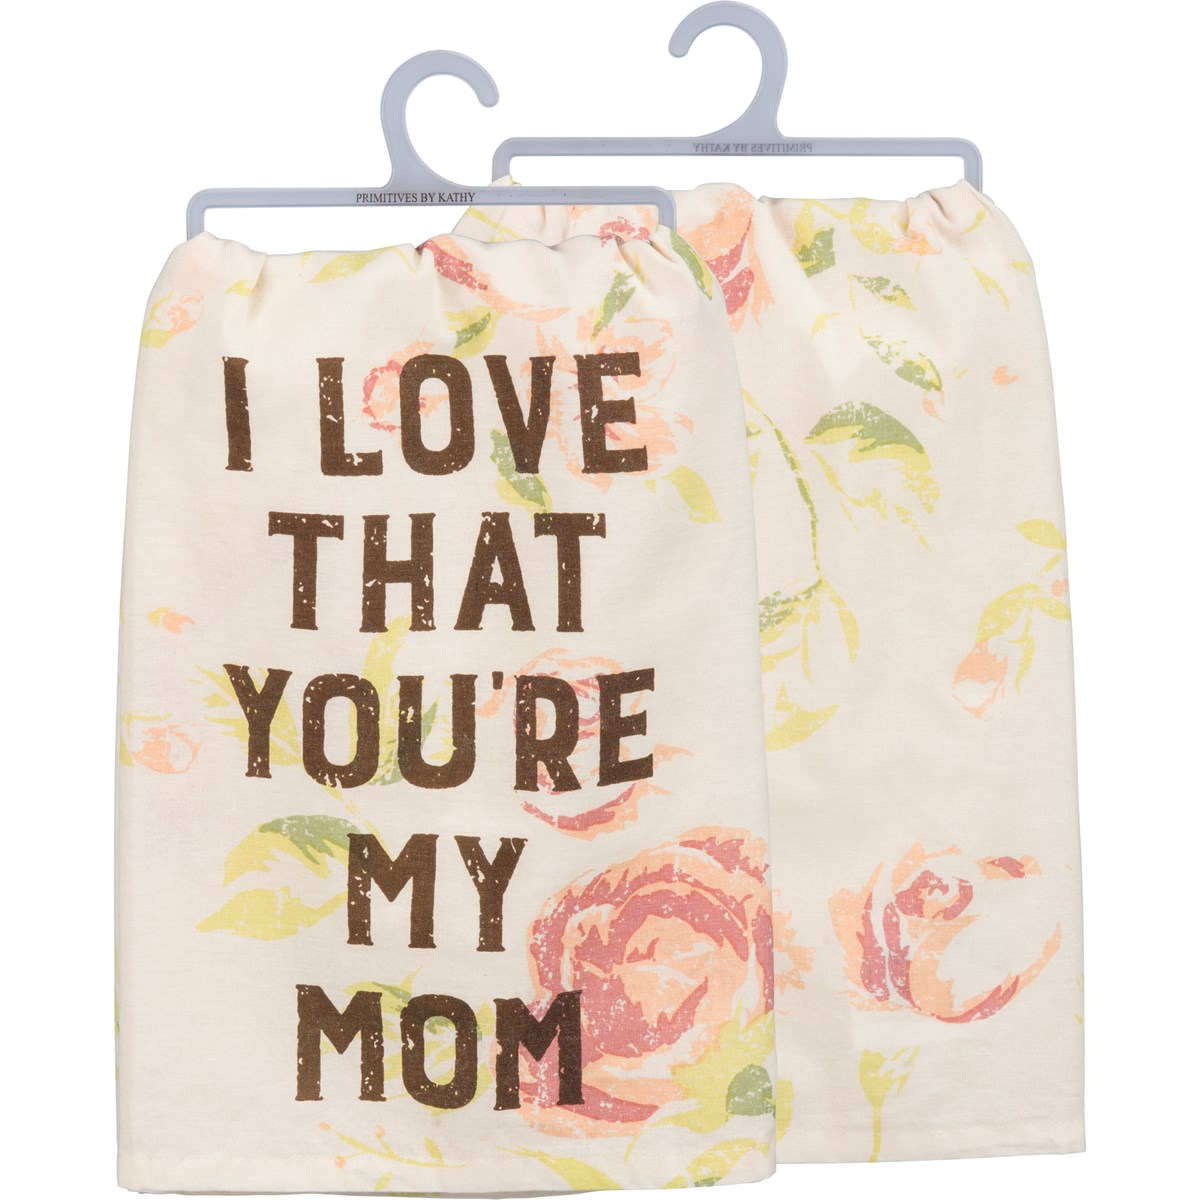 I Love That You're My Mom Kitchen Towel - Cotton